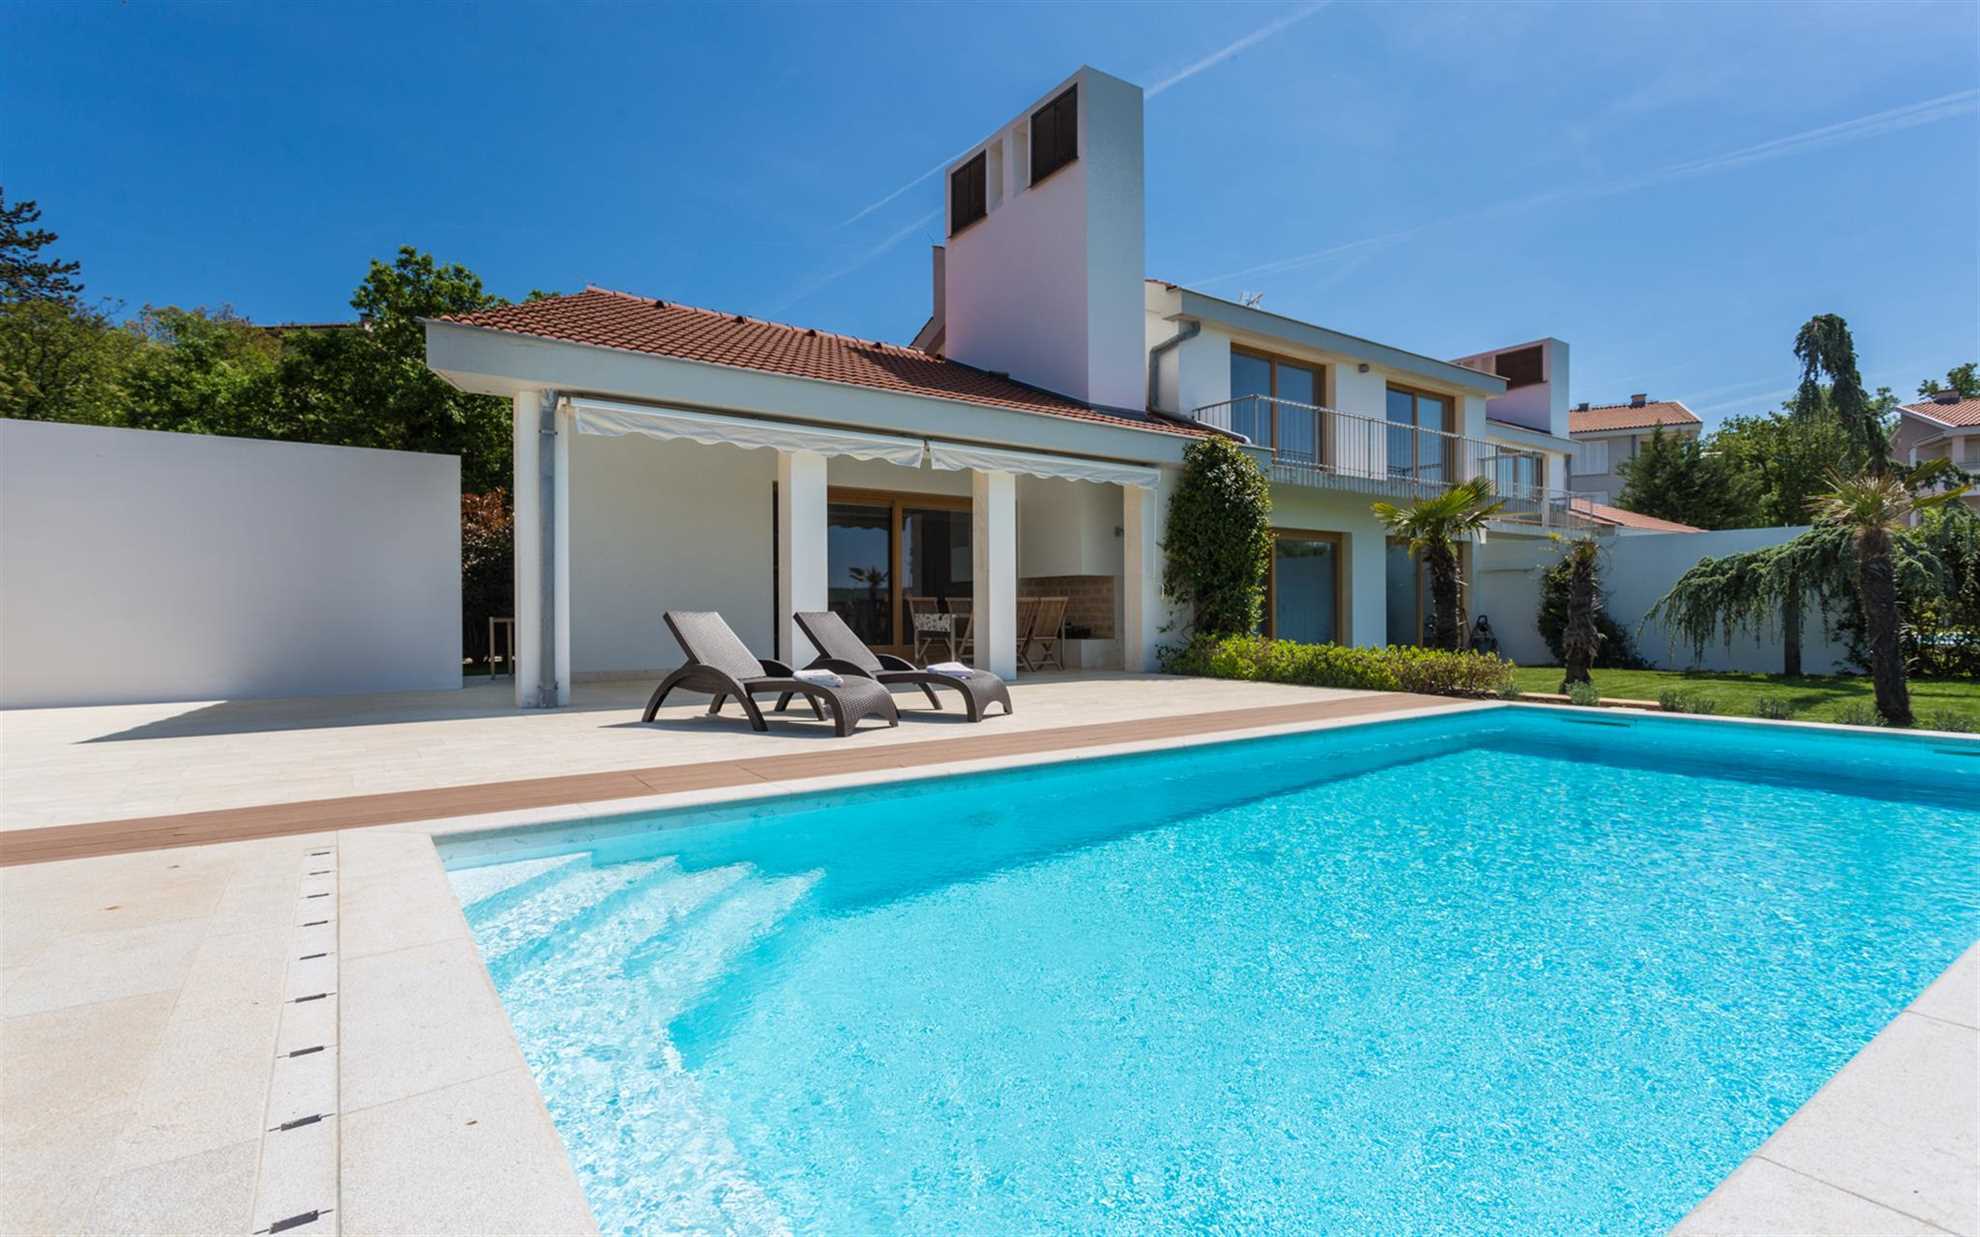 Exclusive and modern Casa Vidmar with a large swimming pool